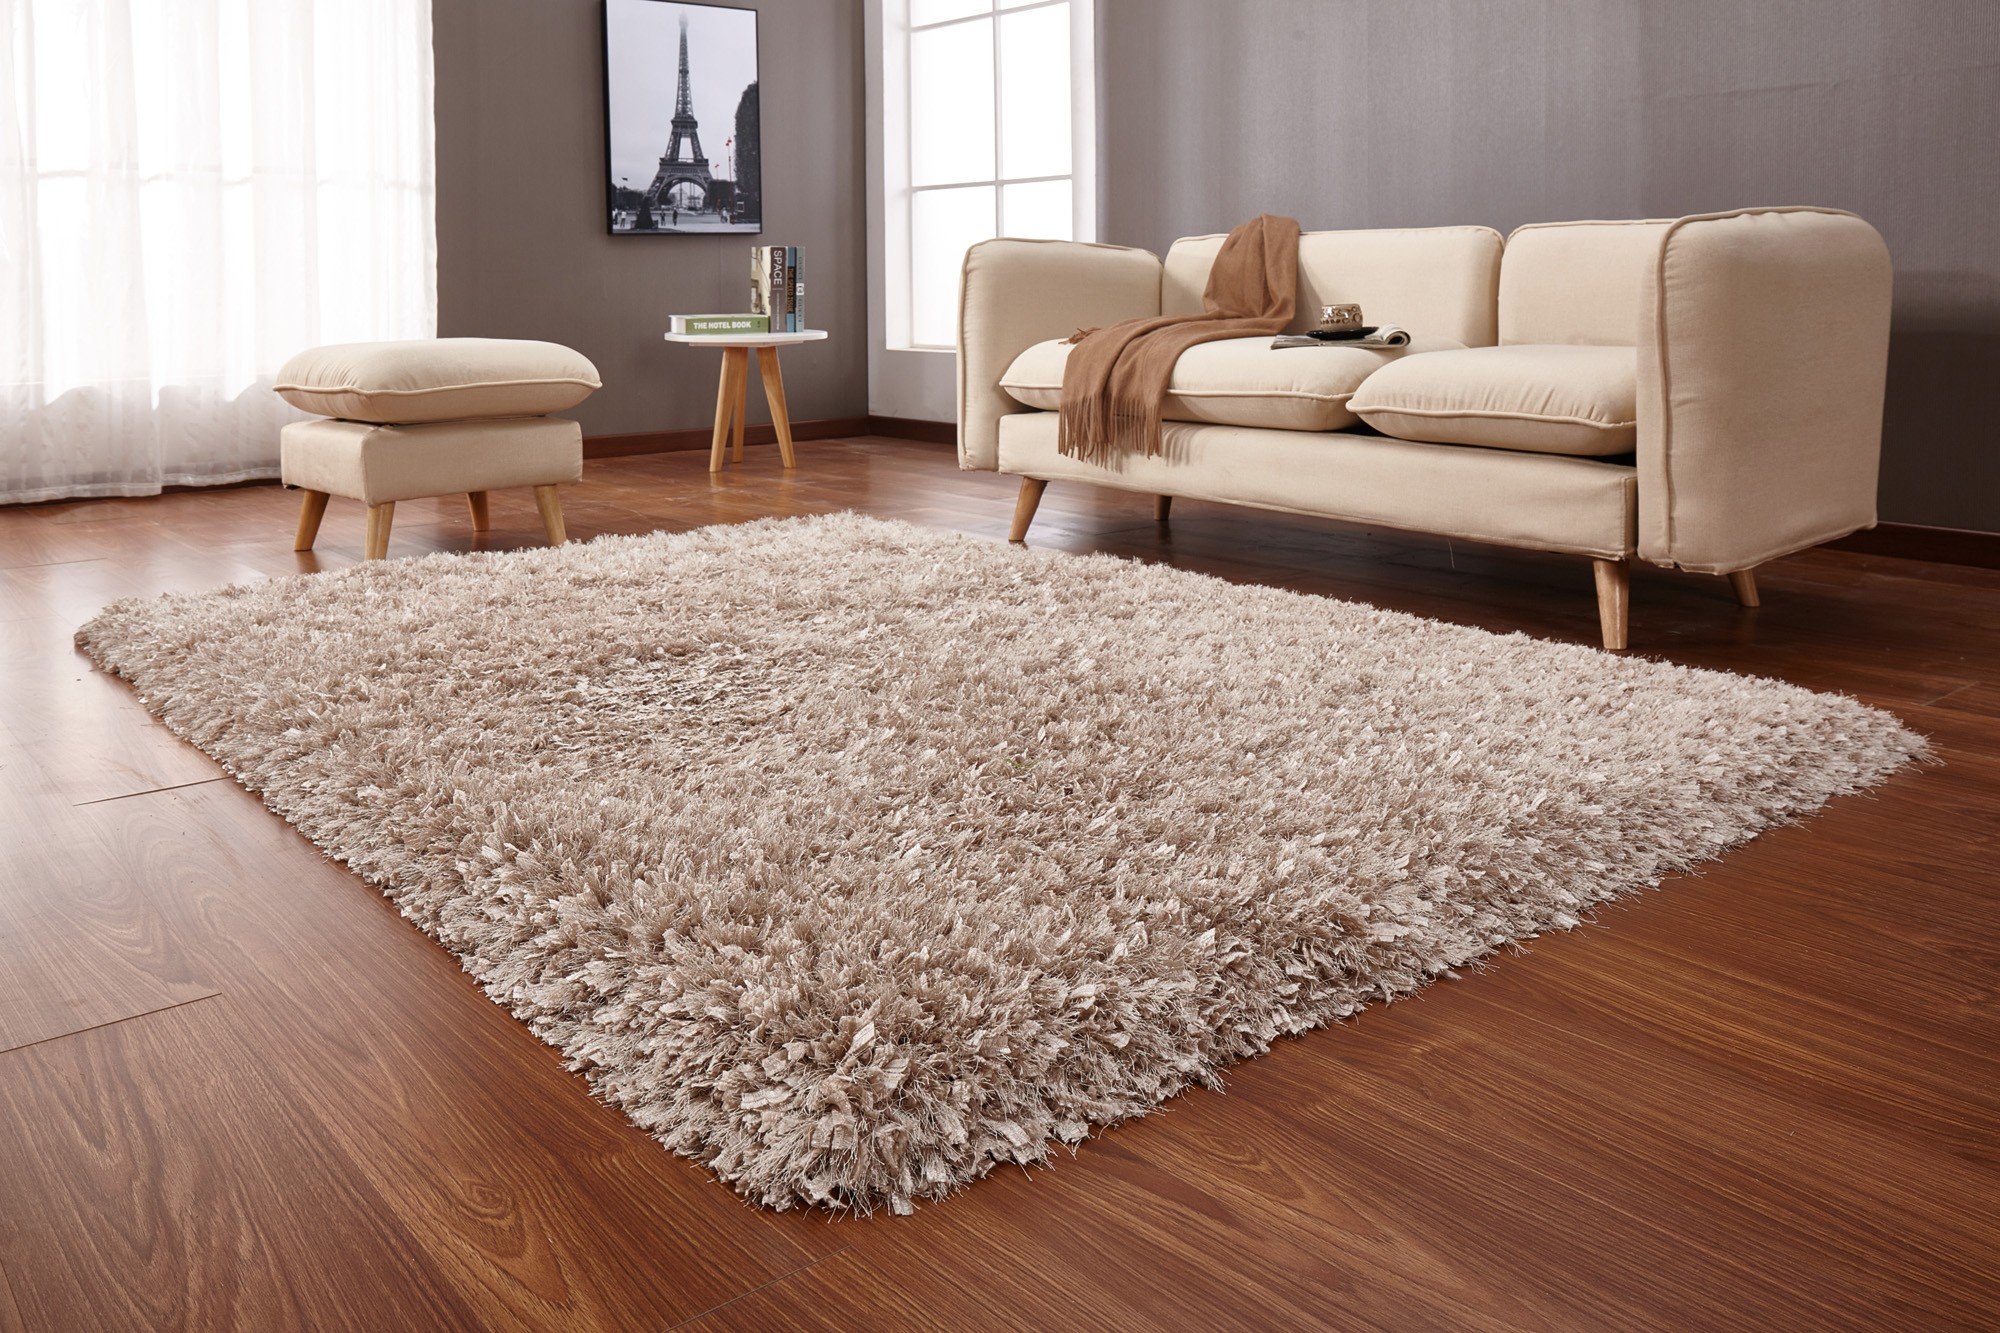 Shaggy Rugs For Living Room Amazon